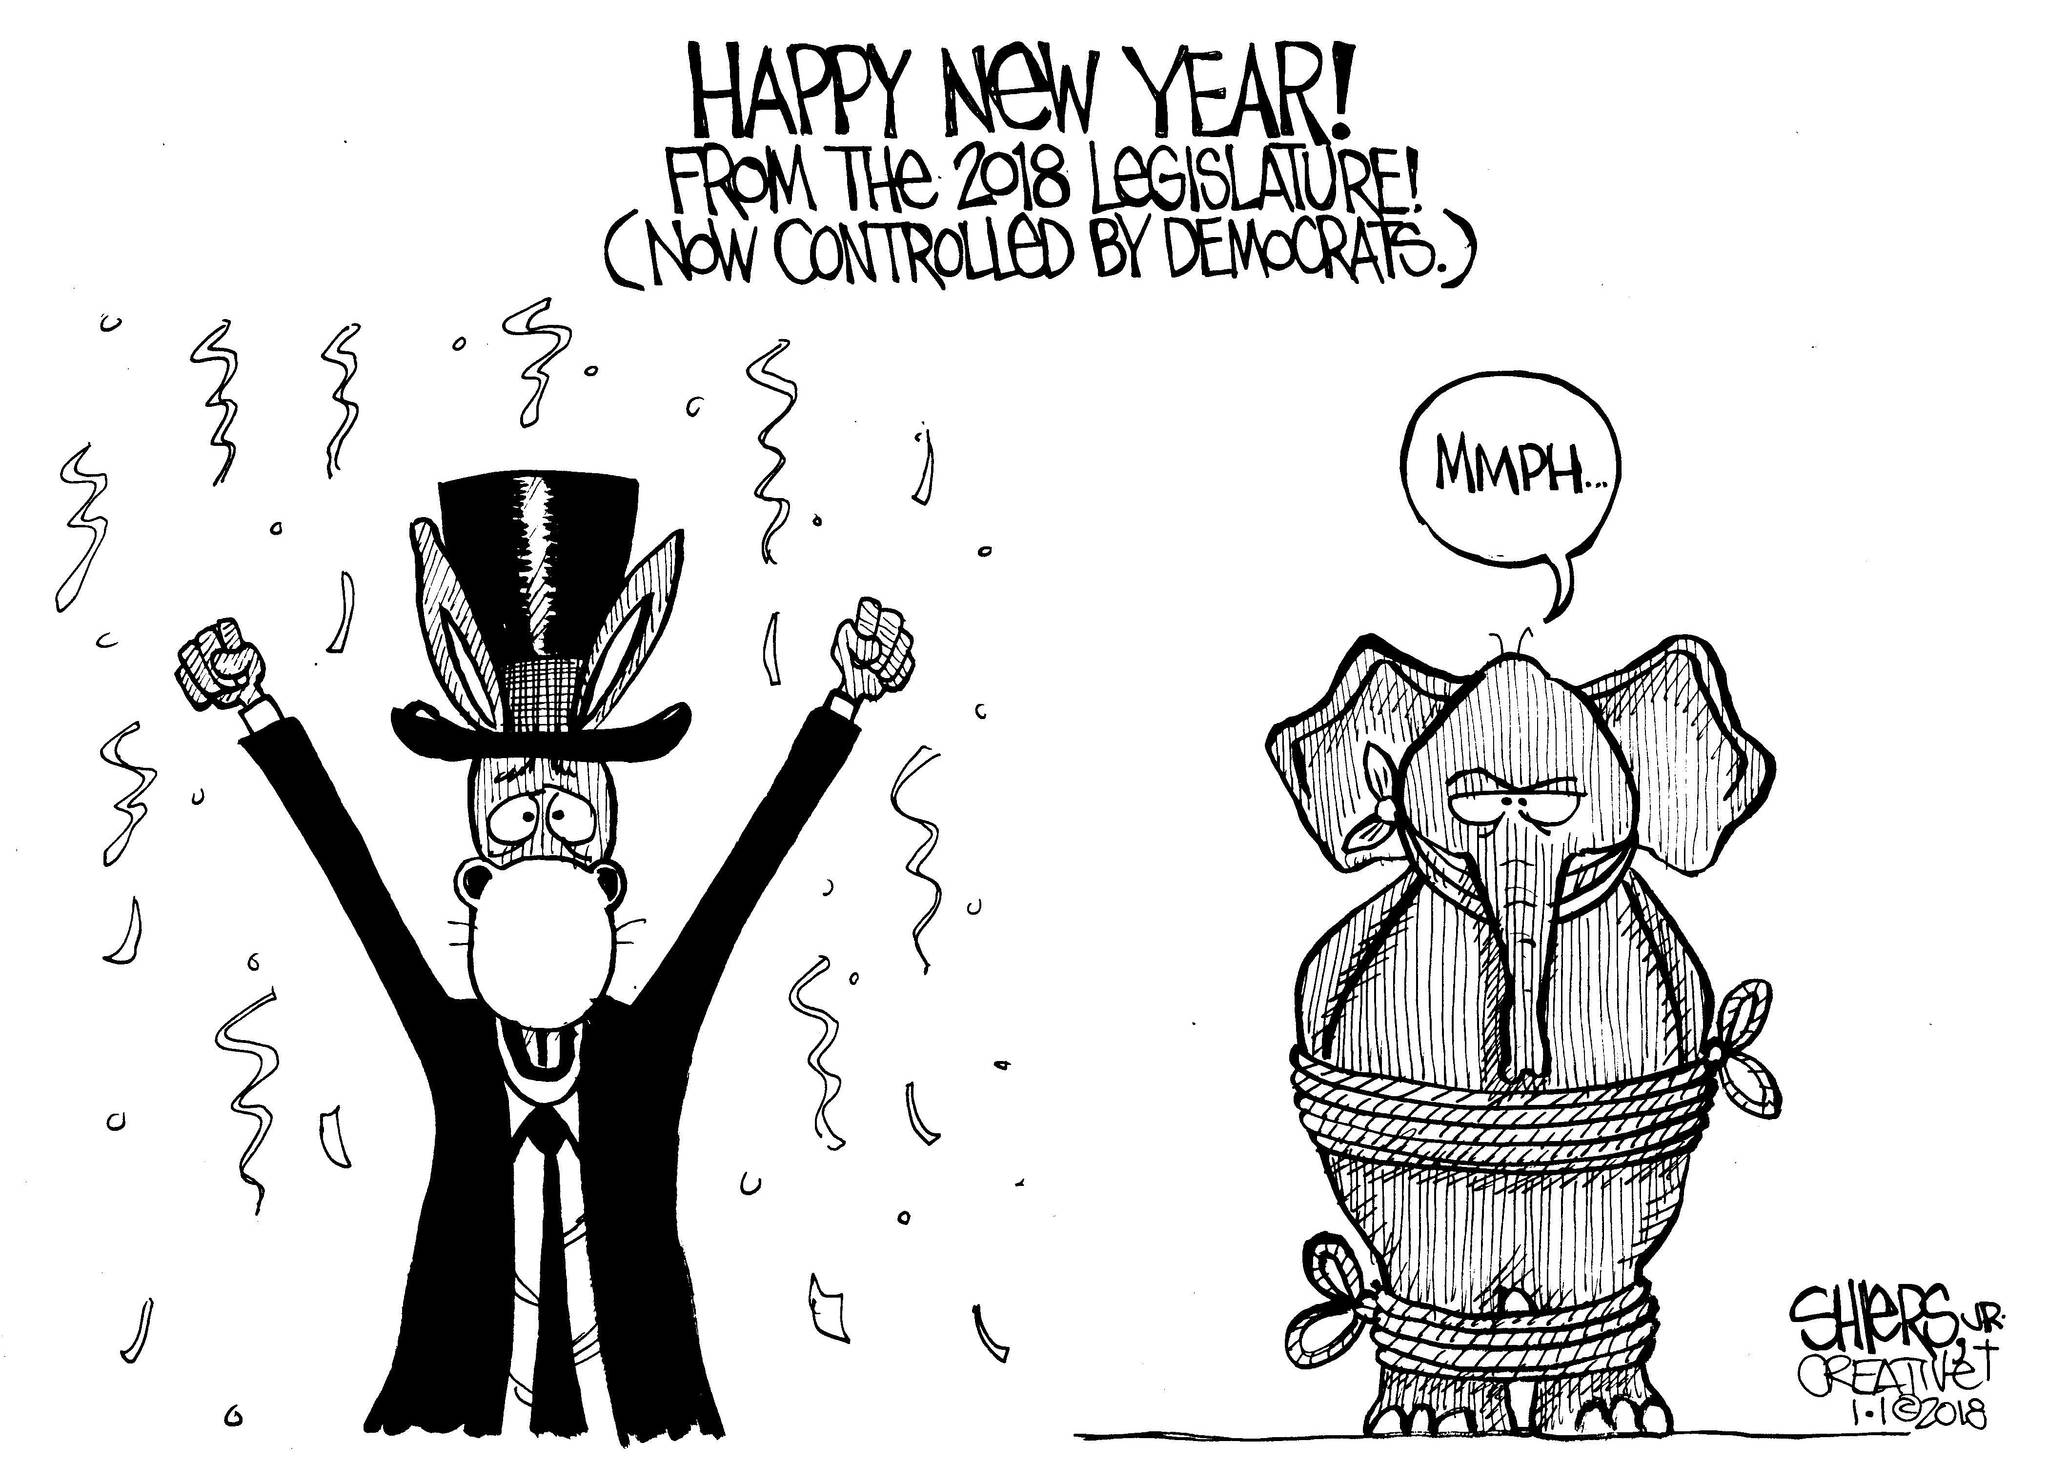 Happy 2018 from the (Dem-controlled) legislature